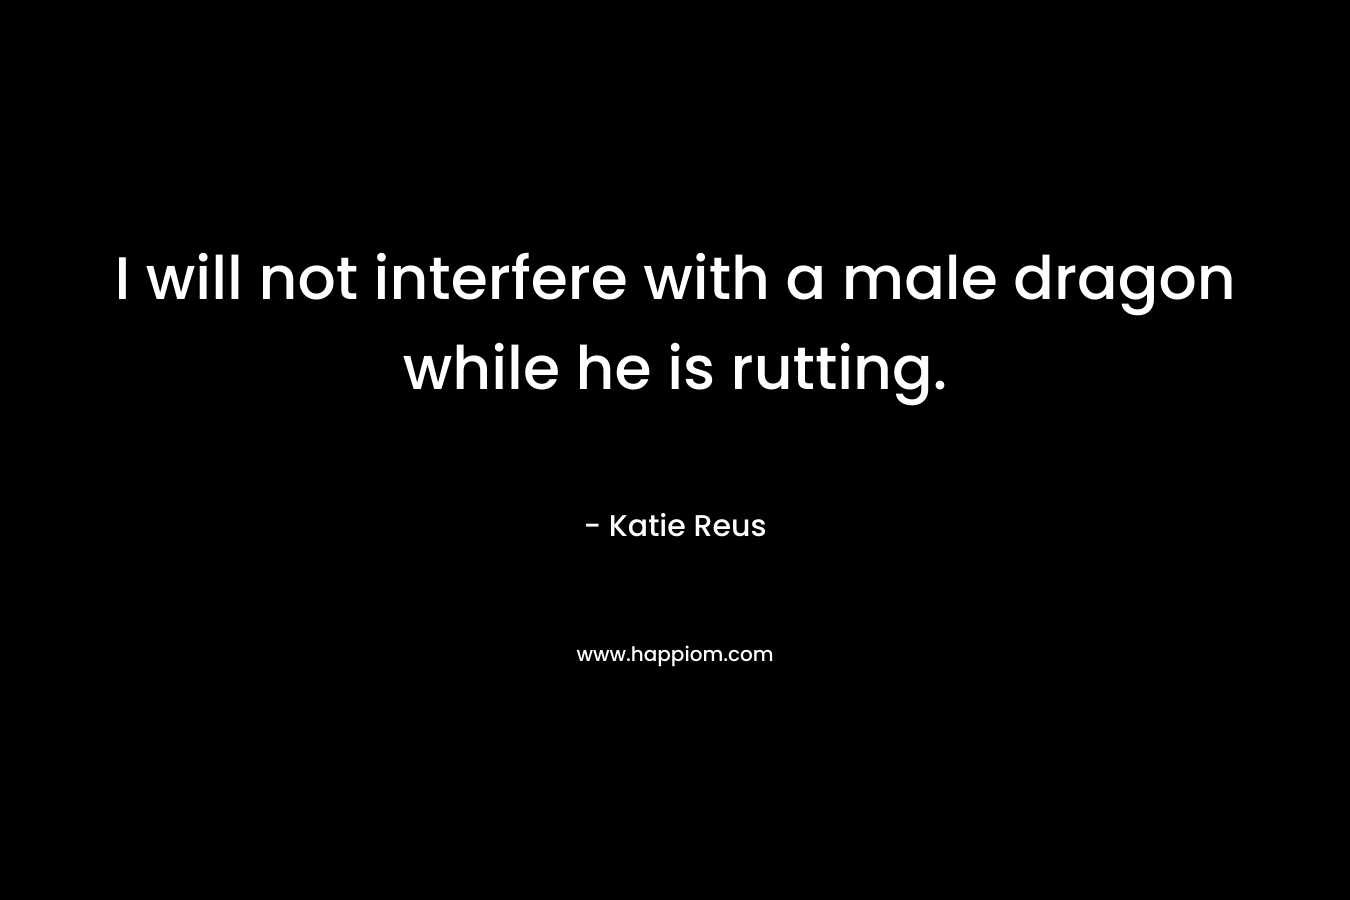 I will not interfere with a male dragon while he is rutting.